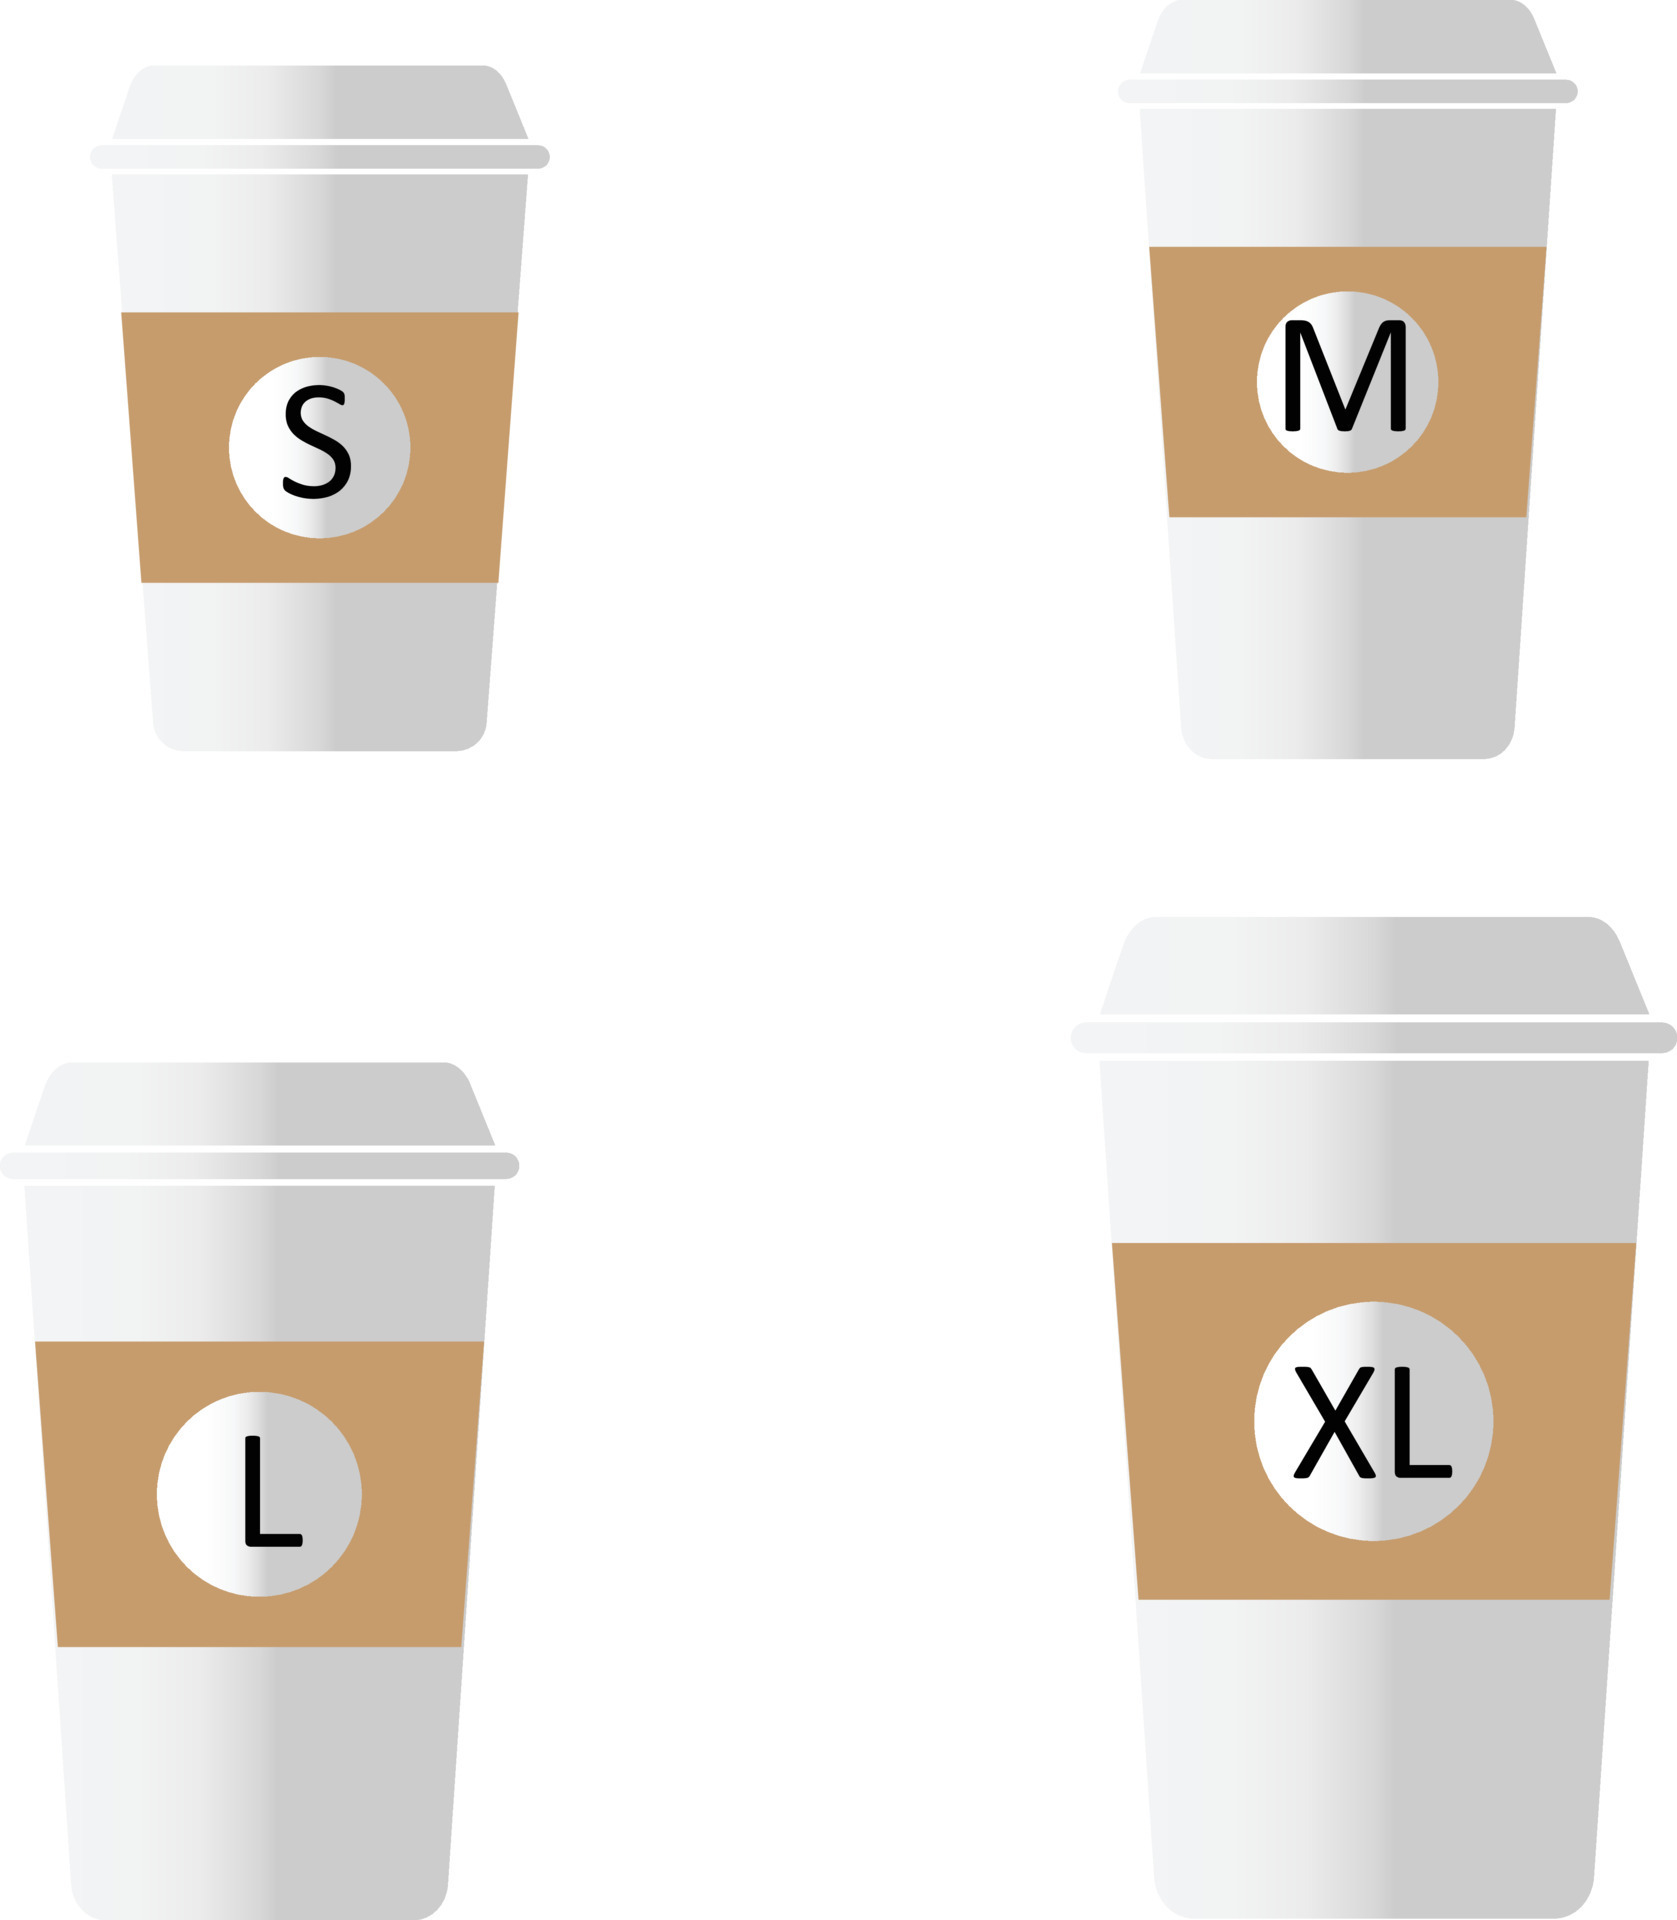 https://static.vecteezy.com/system/resources/previews/009/795/965/original/coffee-to-go-different-sizes-sign-flat-style-coffee-cup-size-s-m-l-xl-icons-on-white-background-take-away-hot-cup-sizes-symbol-different-size-small-medium-large-and-extra-large-vector.jpg